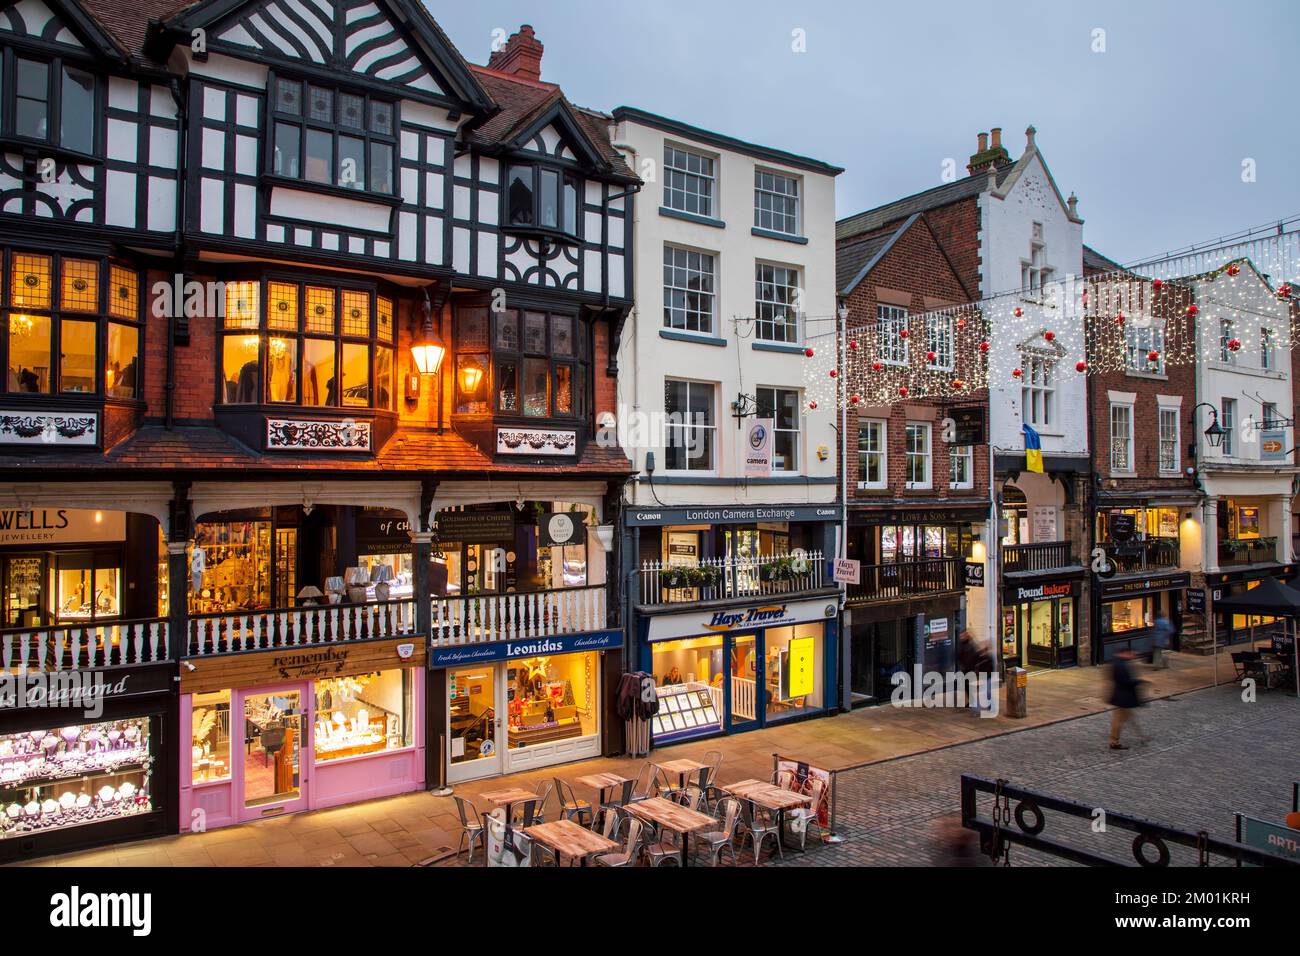 Chester, United Kingdom - November 30th, 2022: Christmas lights decorate old town of Chester Stock Photo